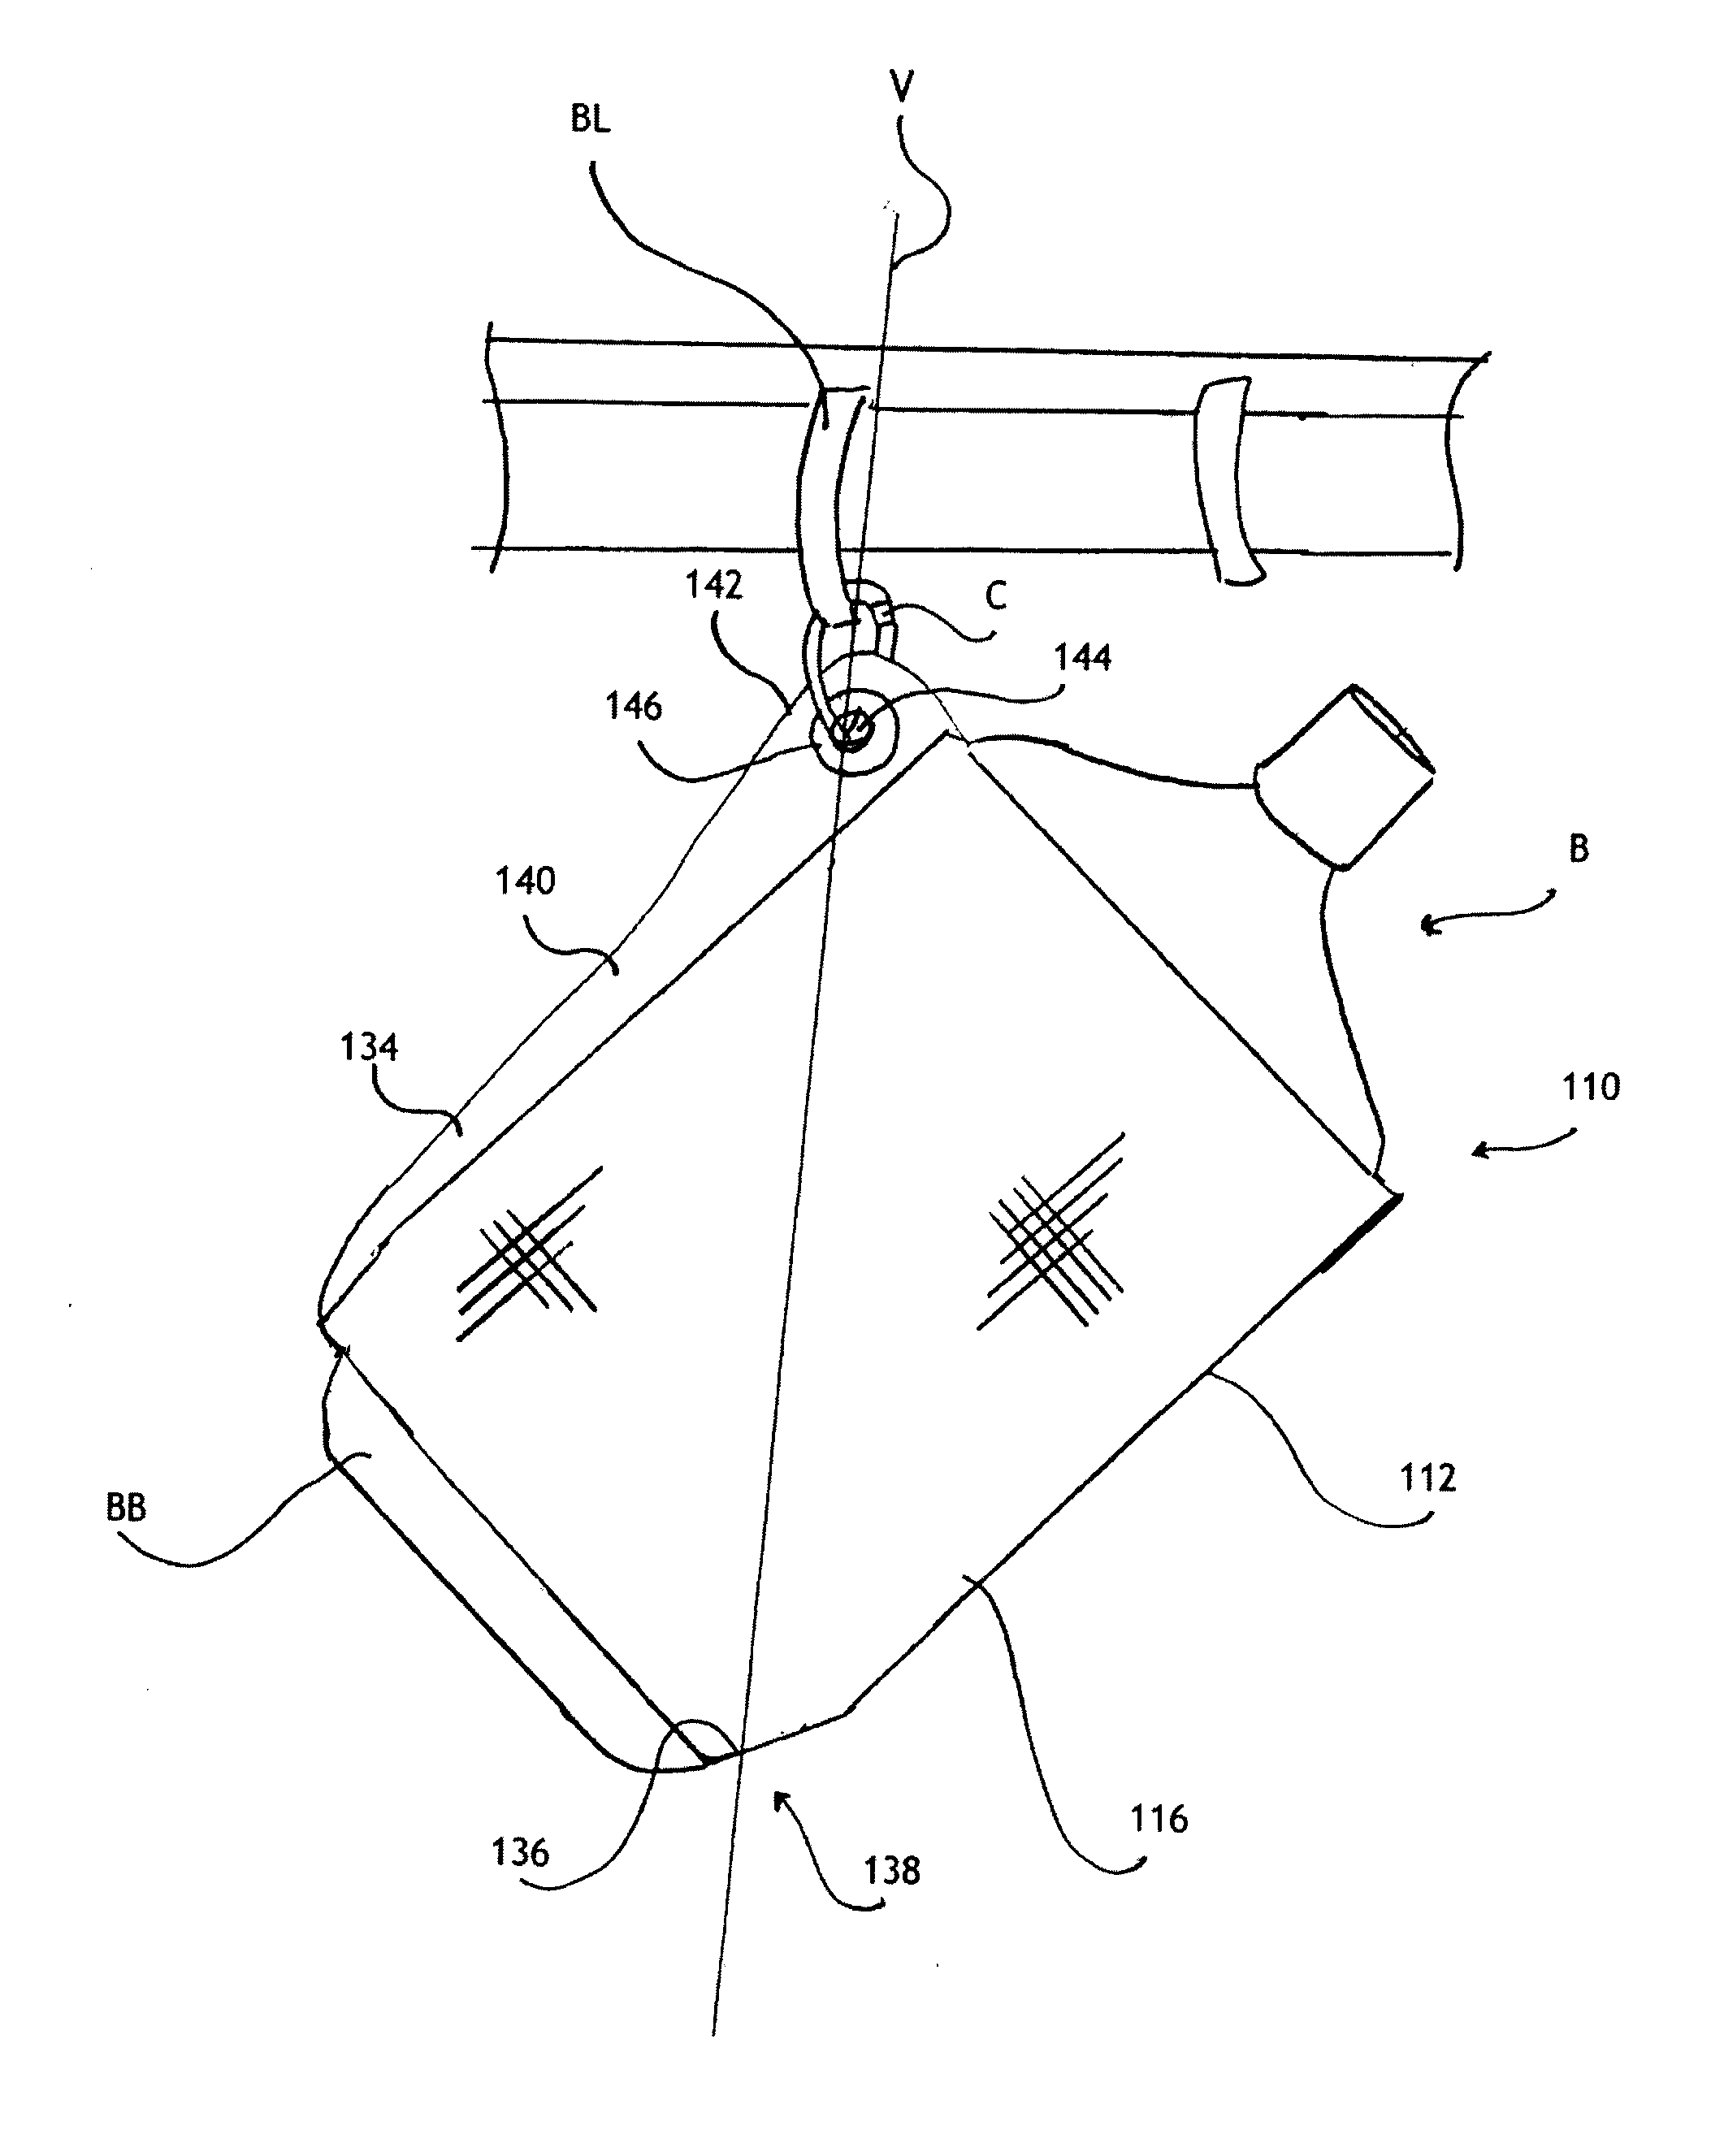 Insulated Jacket for a Support Vessel